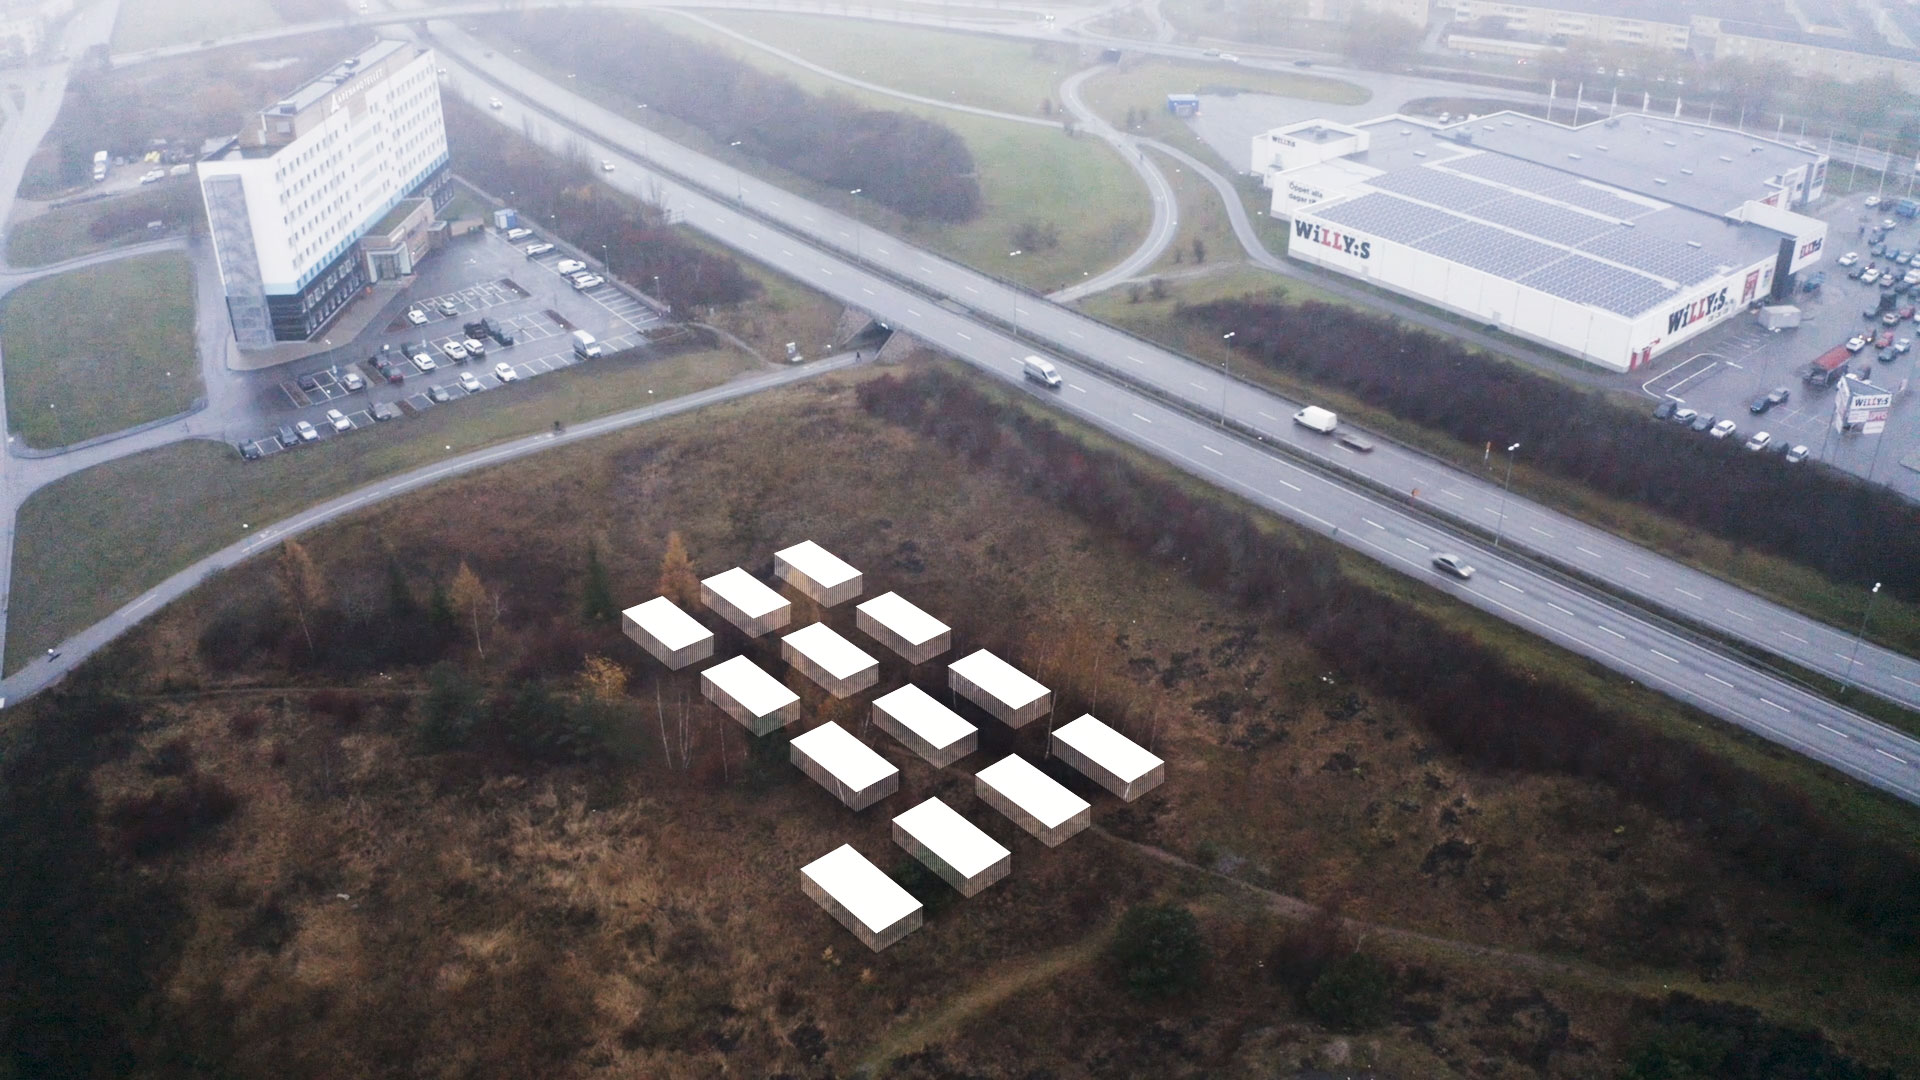 What the new battery storage in Uppsala will look like